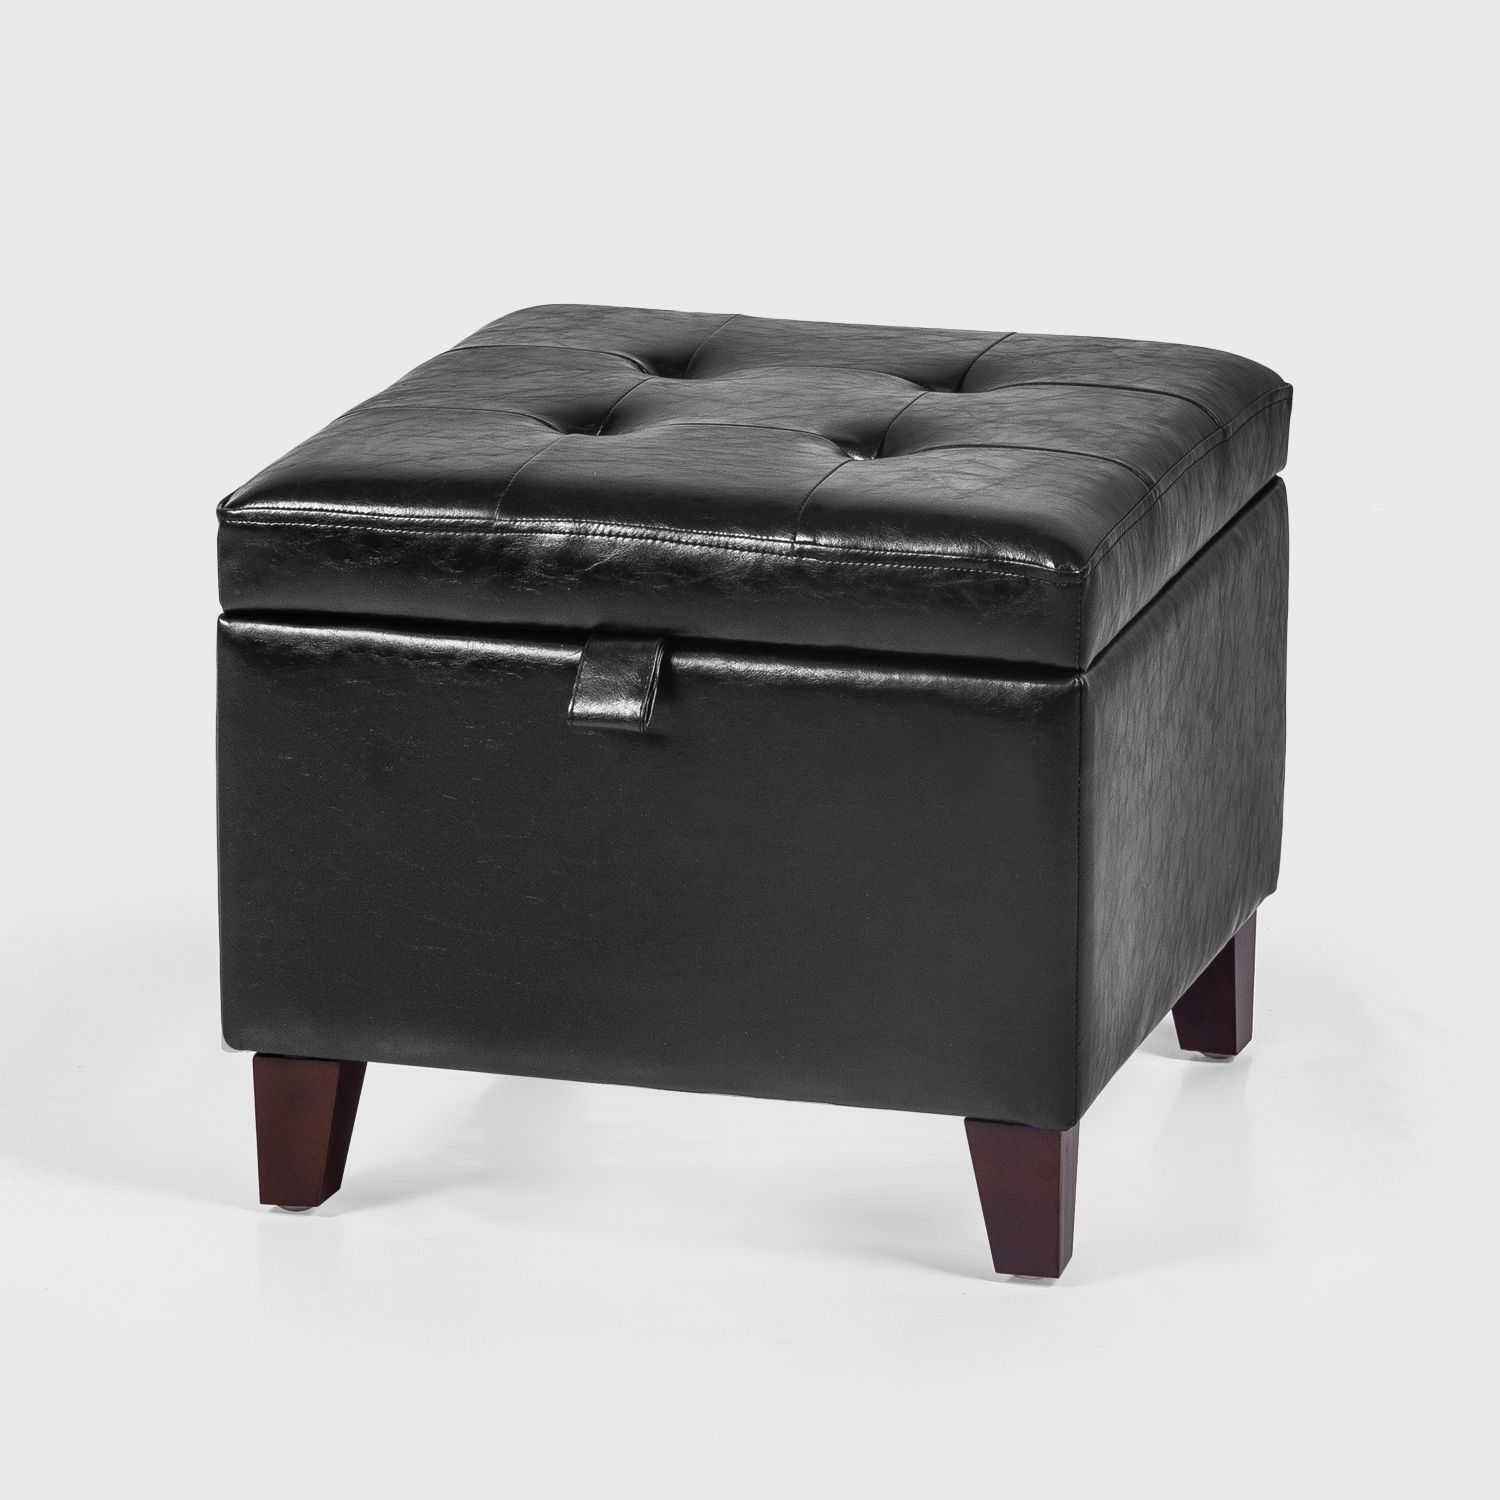 Joveco Faux Leather Square Storage Ottoman Cube Upholstered Foot Rest With Regard To Square Cube Ottomans (View 17 of 20)